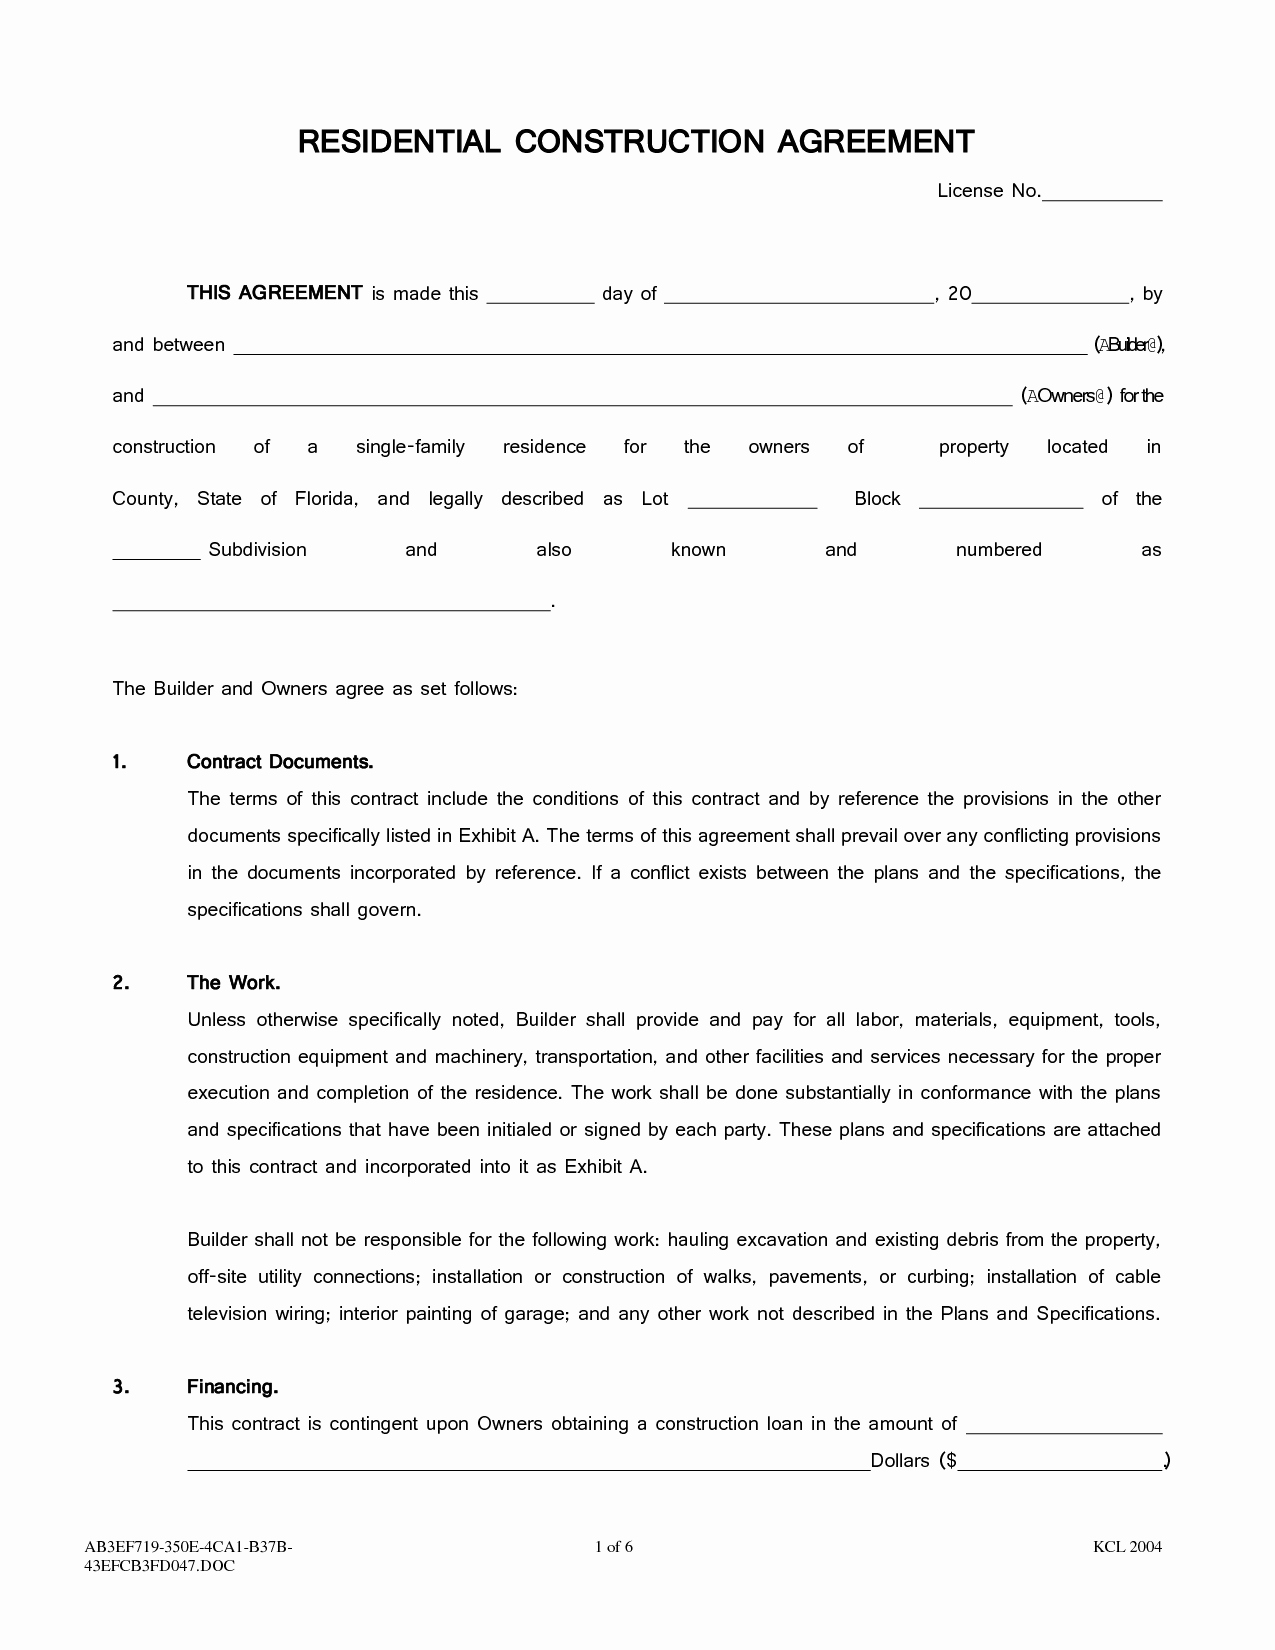 Construction Contract Template Free Download Awesome Residential Construction Agreement License No This by